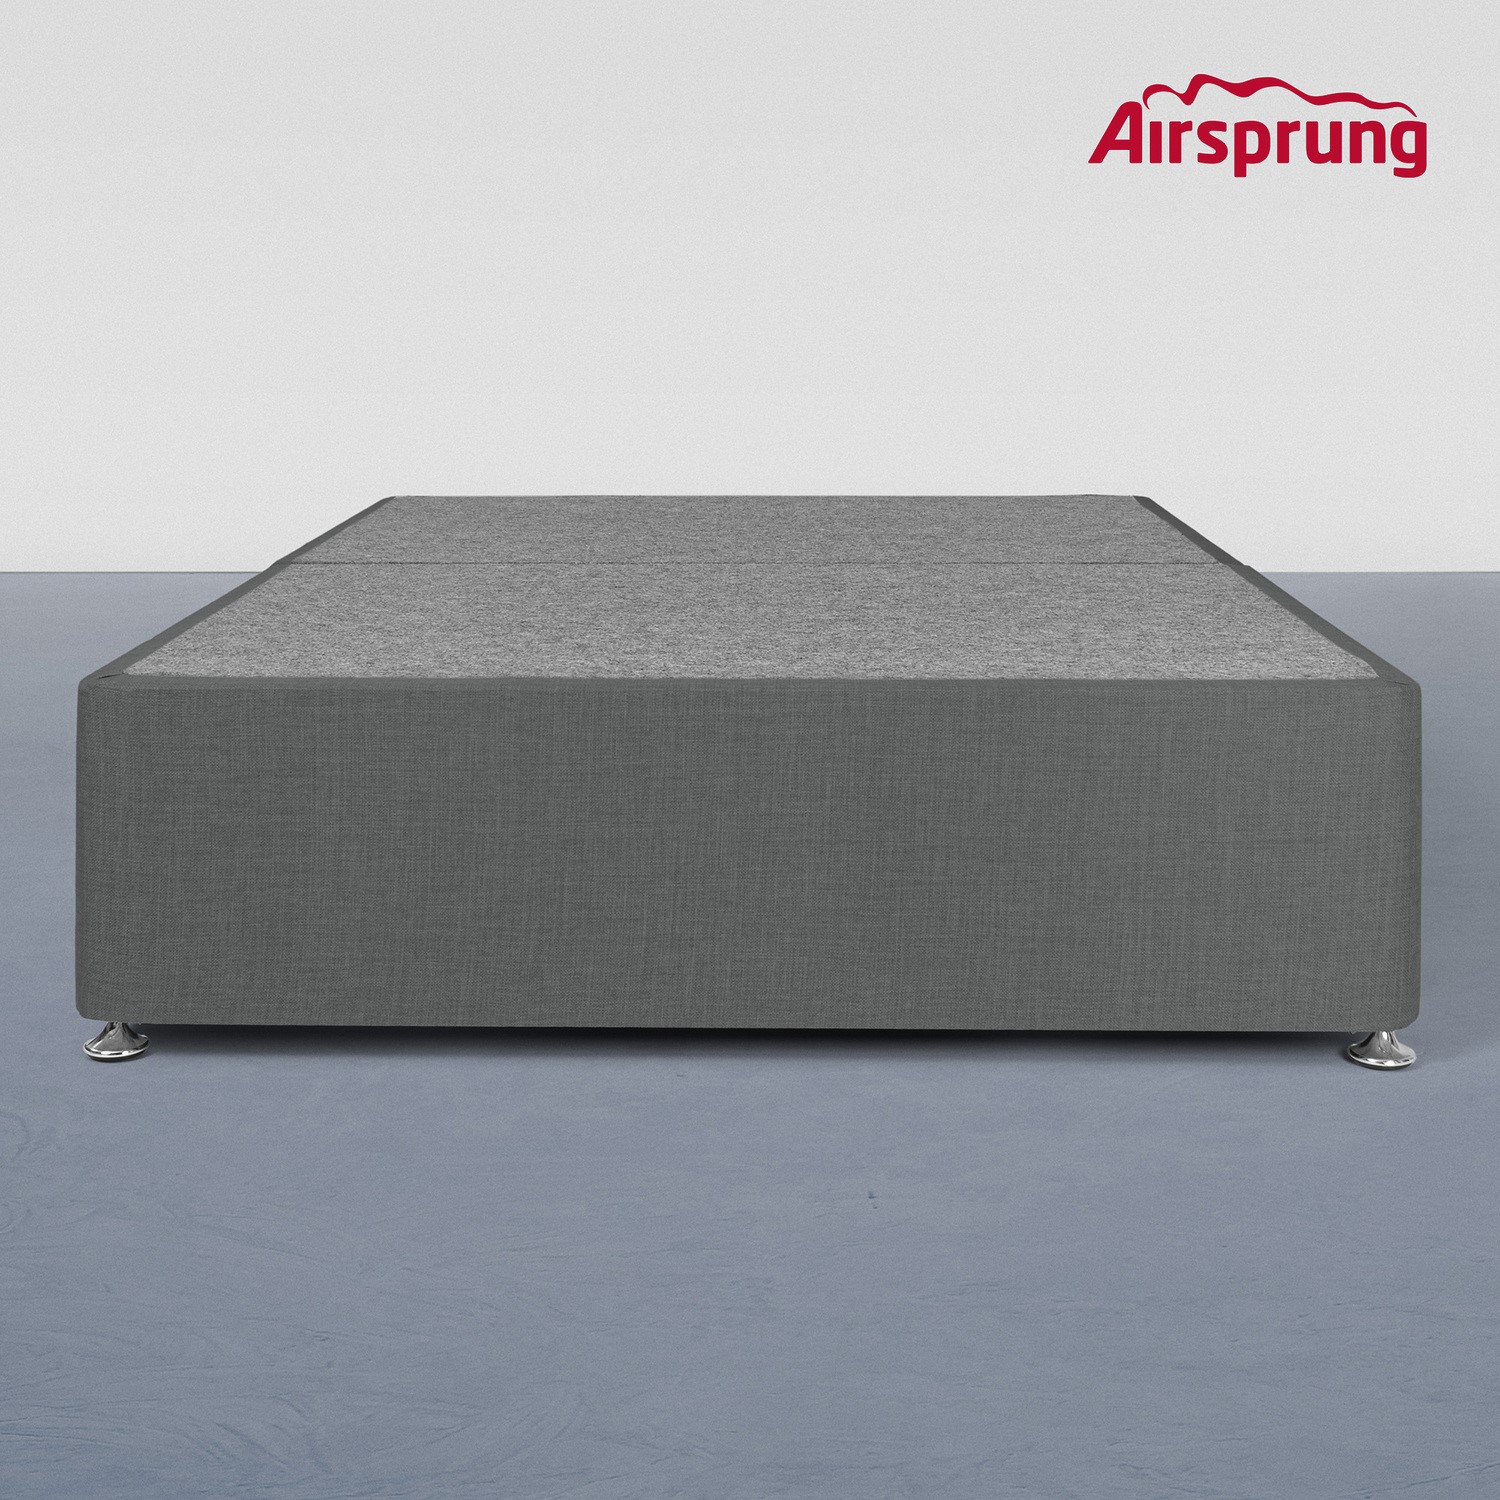 Read more about Airsprung kelston small double 2 drawer divan charcoal